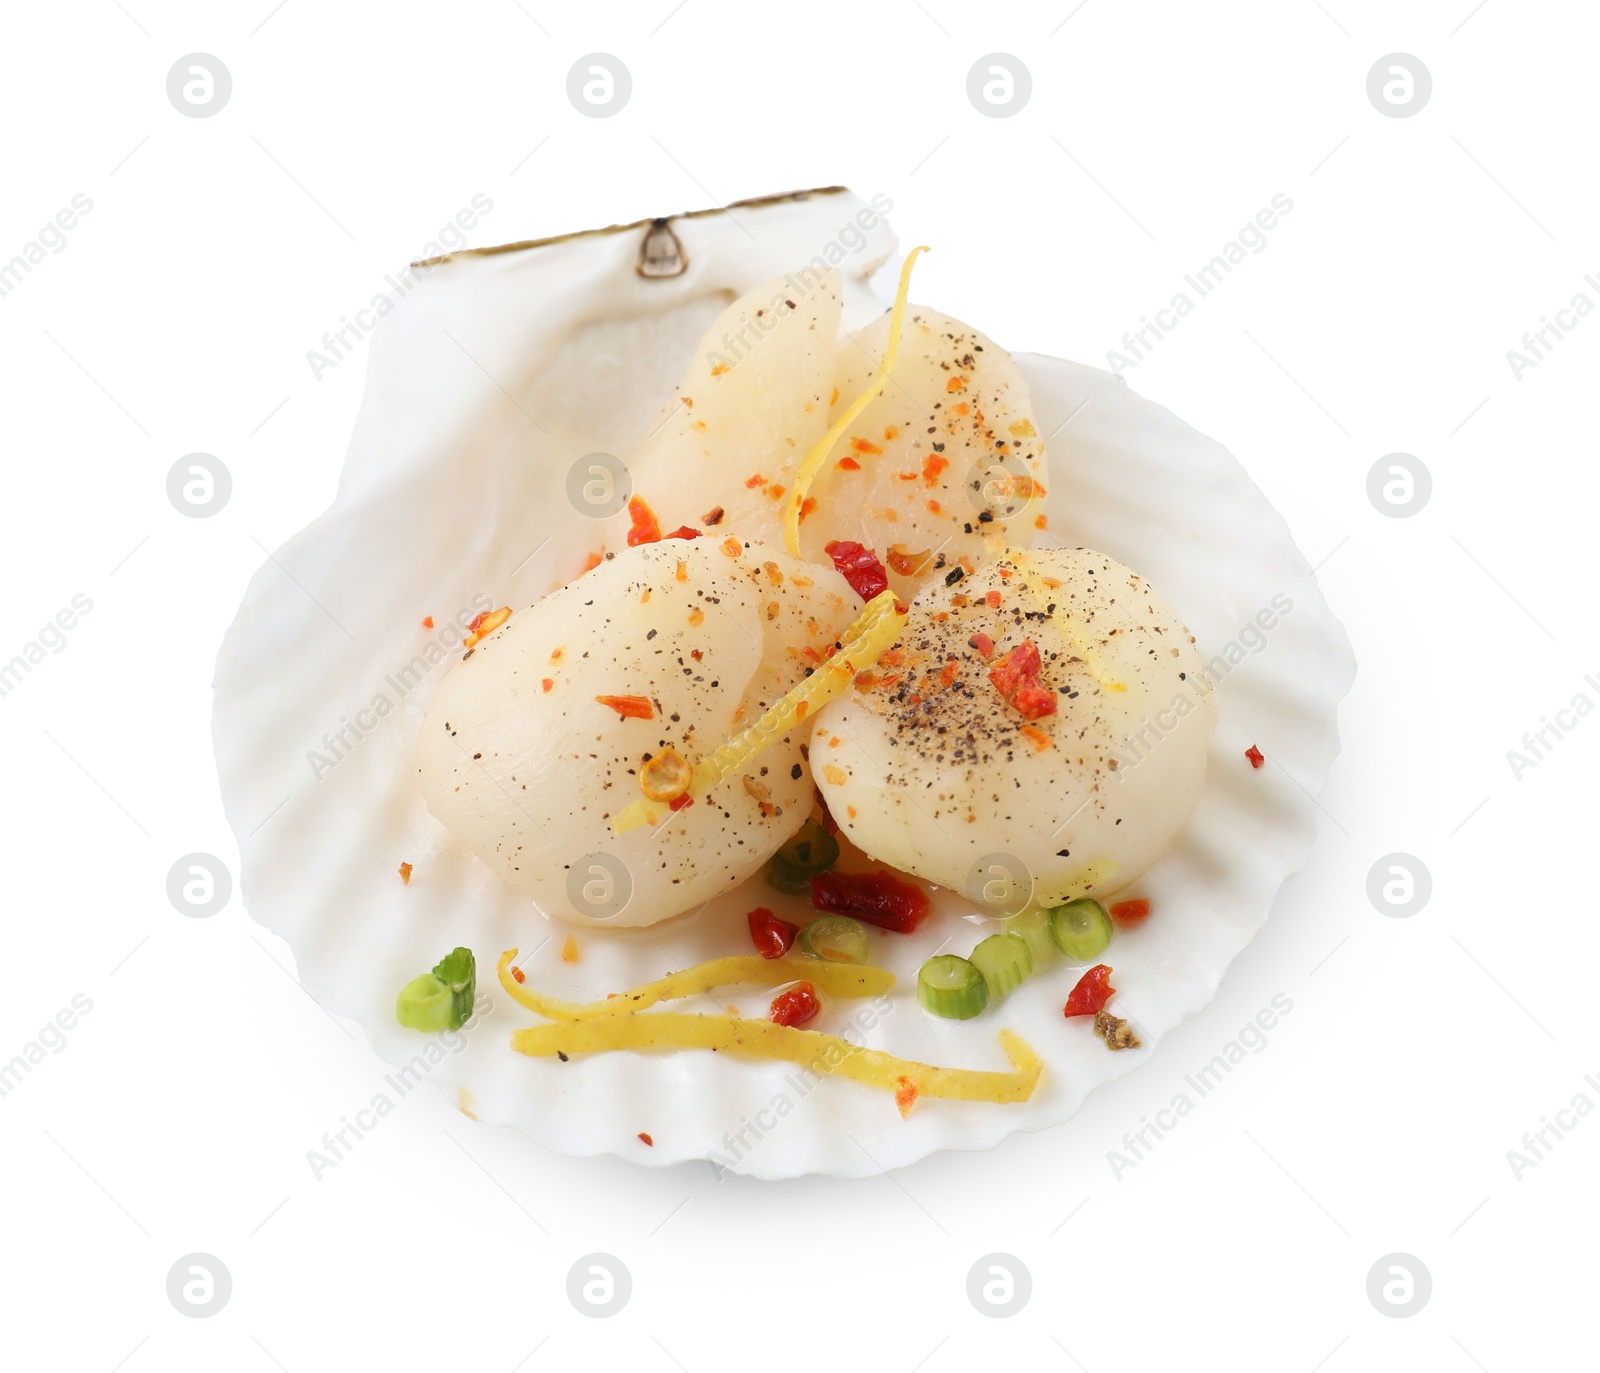 Photo of Raw scallop with lemon zest, green onion, spices and shell isolated on white